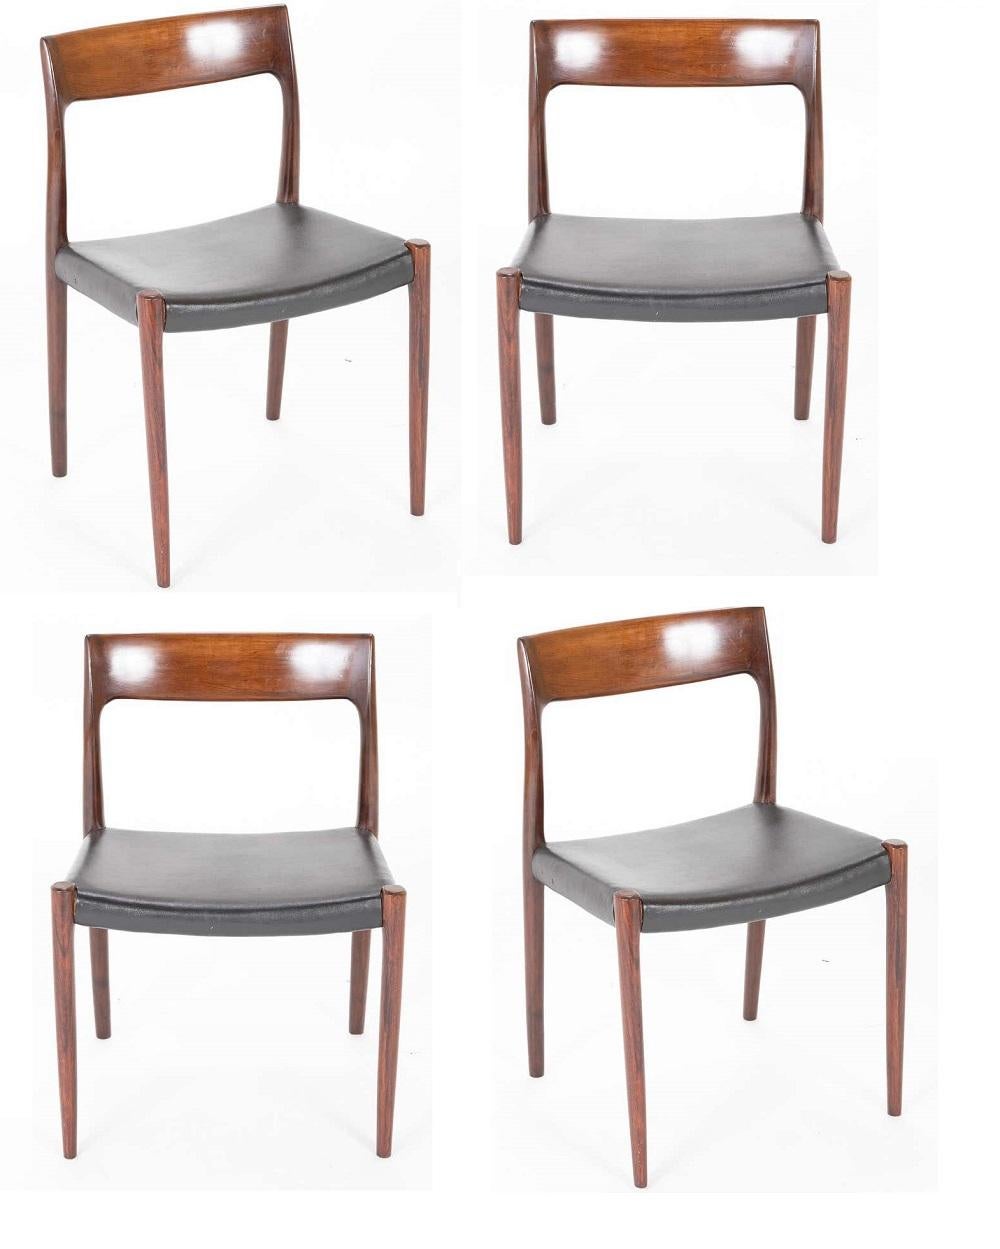 Niels Moller designed model 77 rosewood dining chairs. A set of 4 designed in 1959 produced in the 1960s.